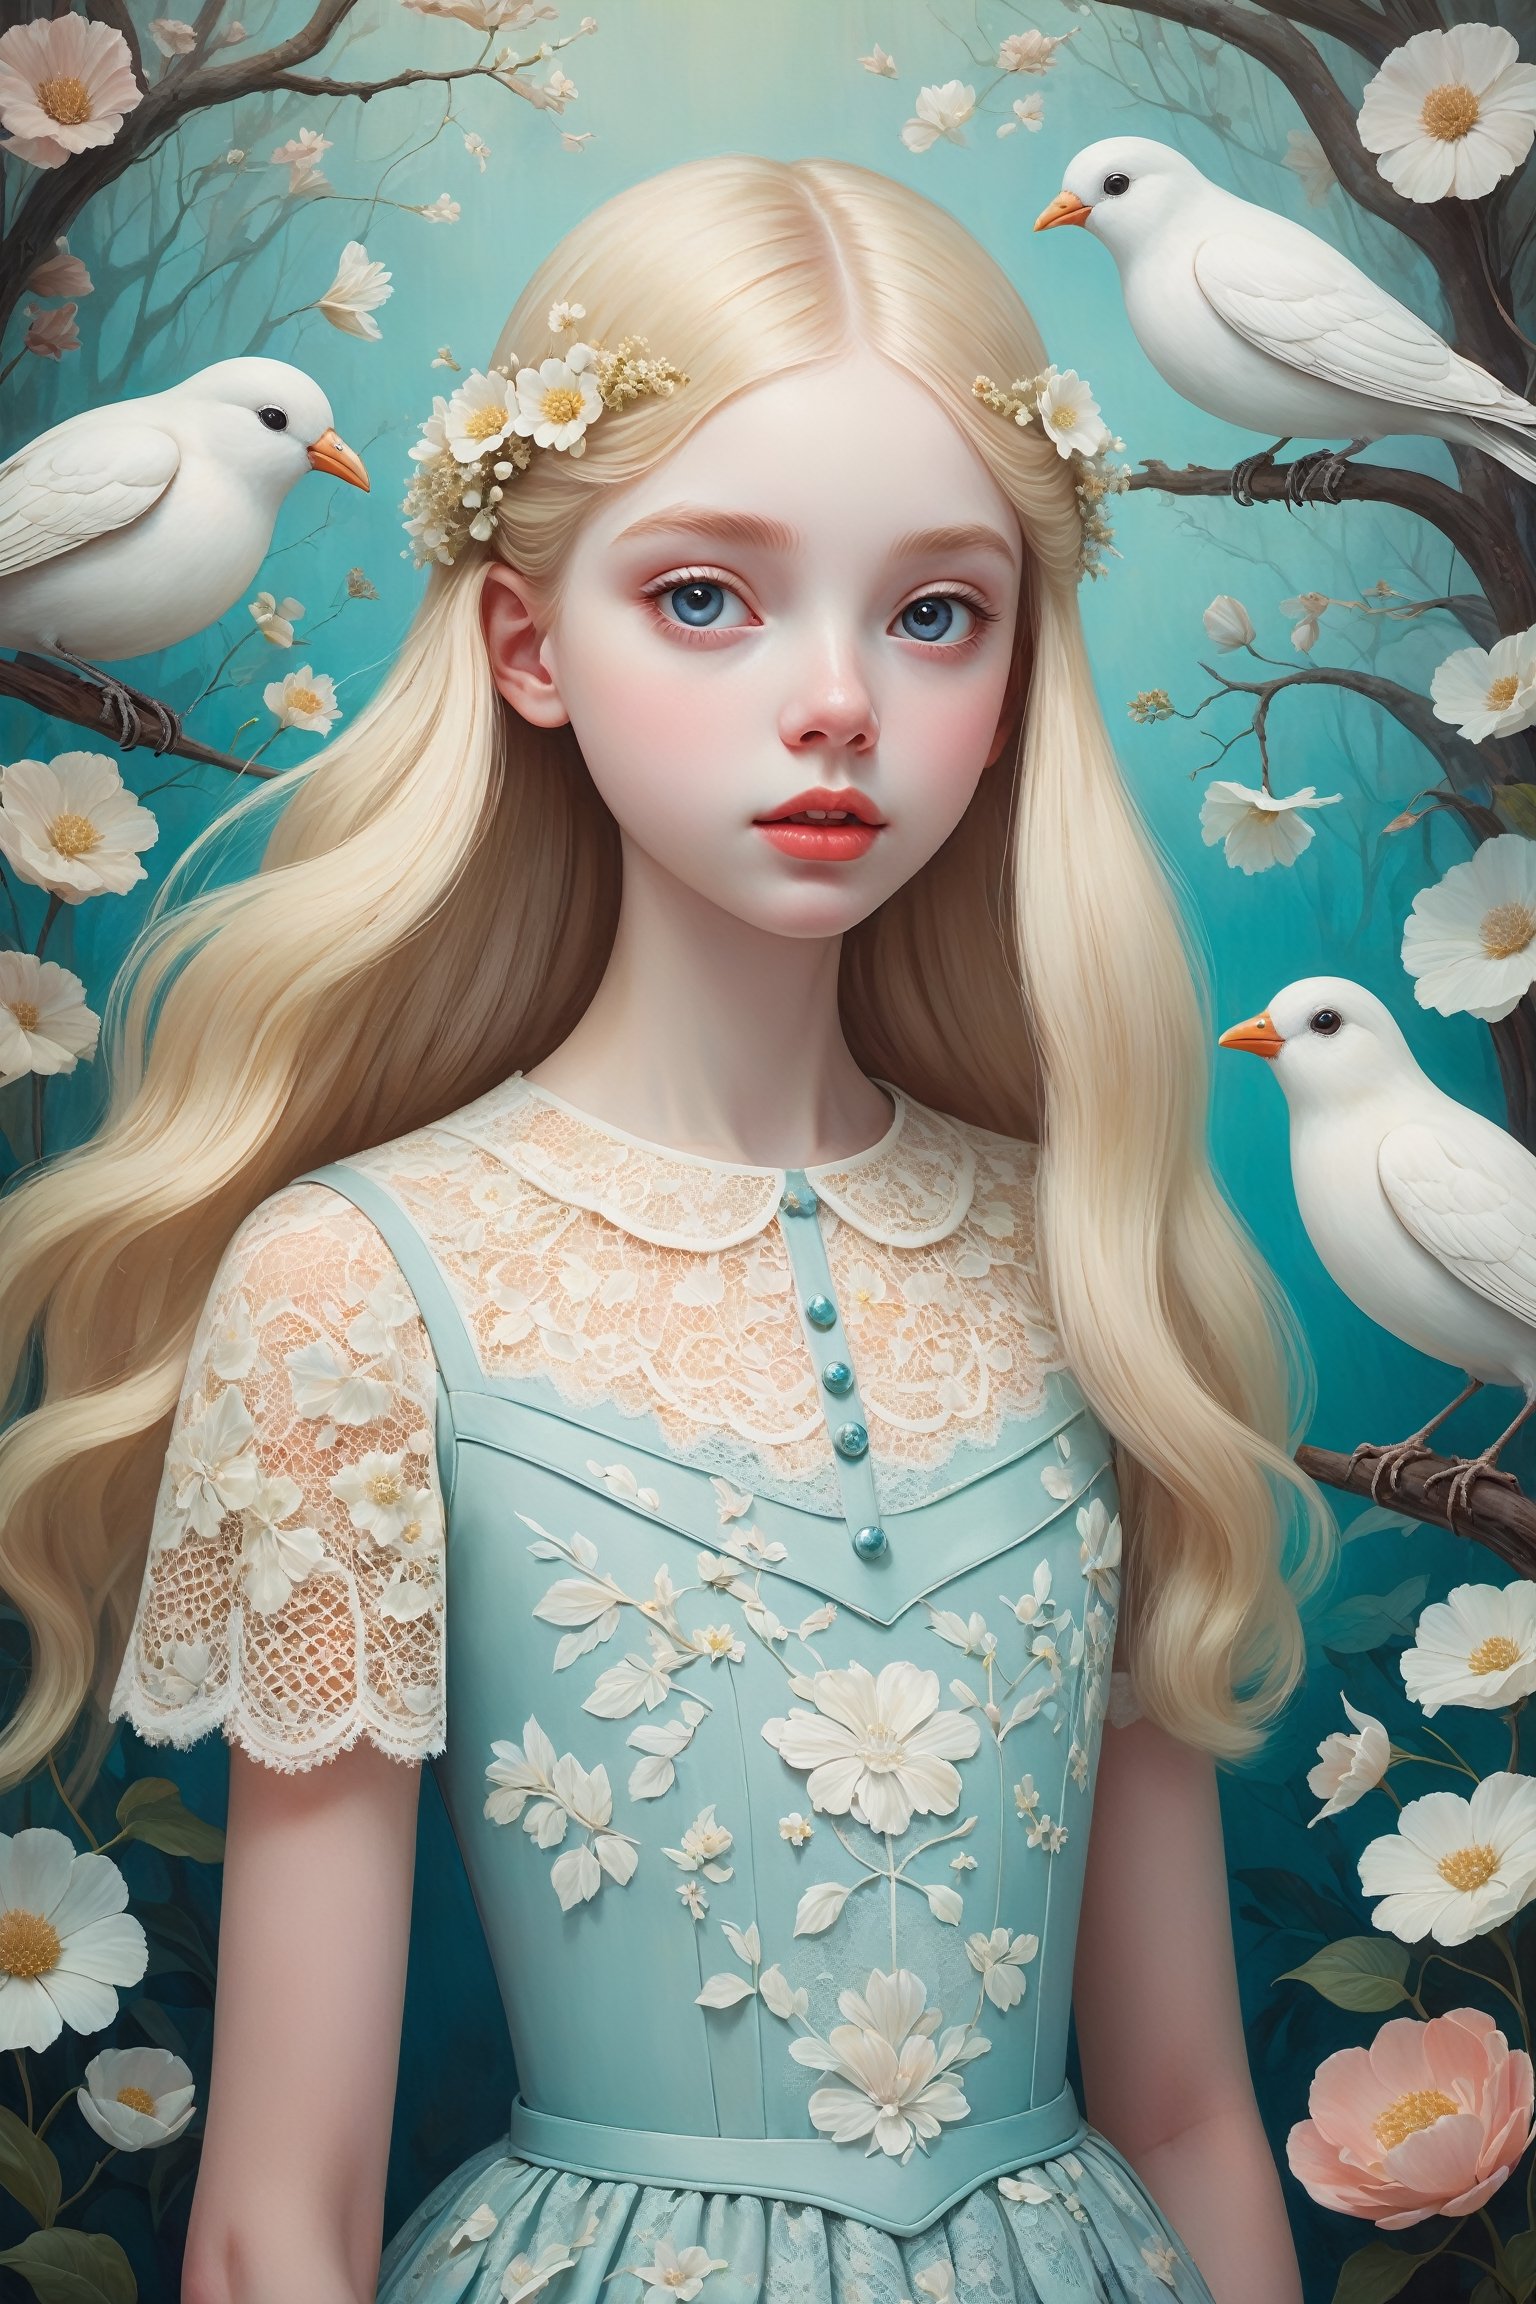 Oil painting of a 16 year old girl with a ghostly white face, huge round eyes, super small nose and mouth, long blonde hair, lace dress, soft color, dreamlike, surrealism, background with birds and flowers, intricate details, 3D rendering, octane rendering. Art in pop surrealism lowbrow creepy cute style. Inspired by Ray Caesar. Vintage art, opaque colors, light grain, indirect lighting.